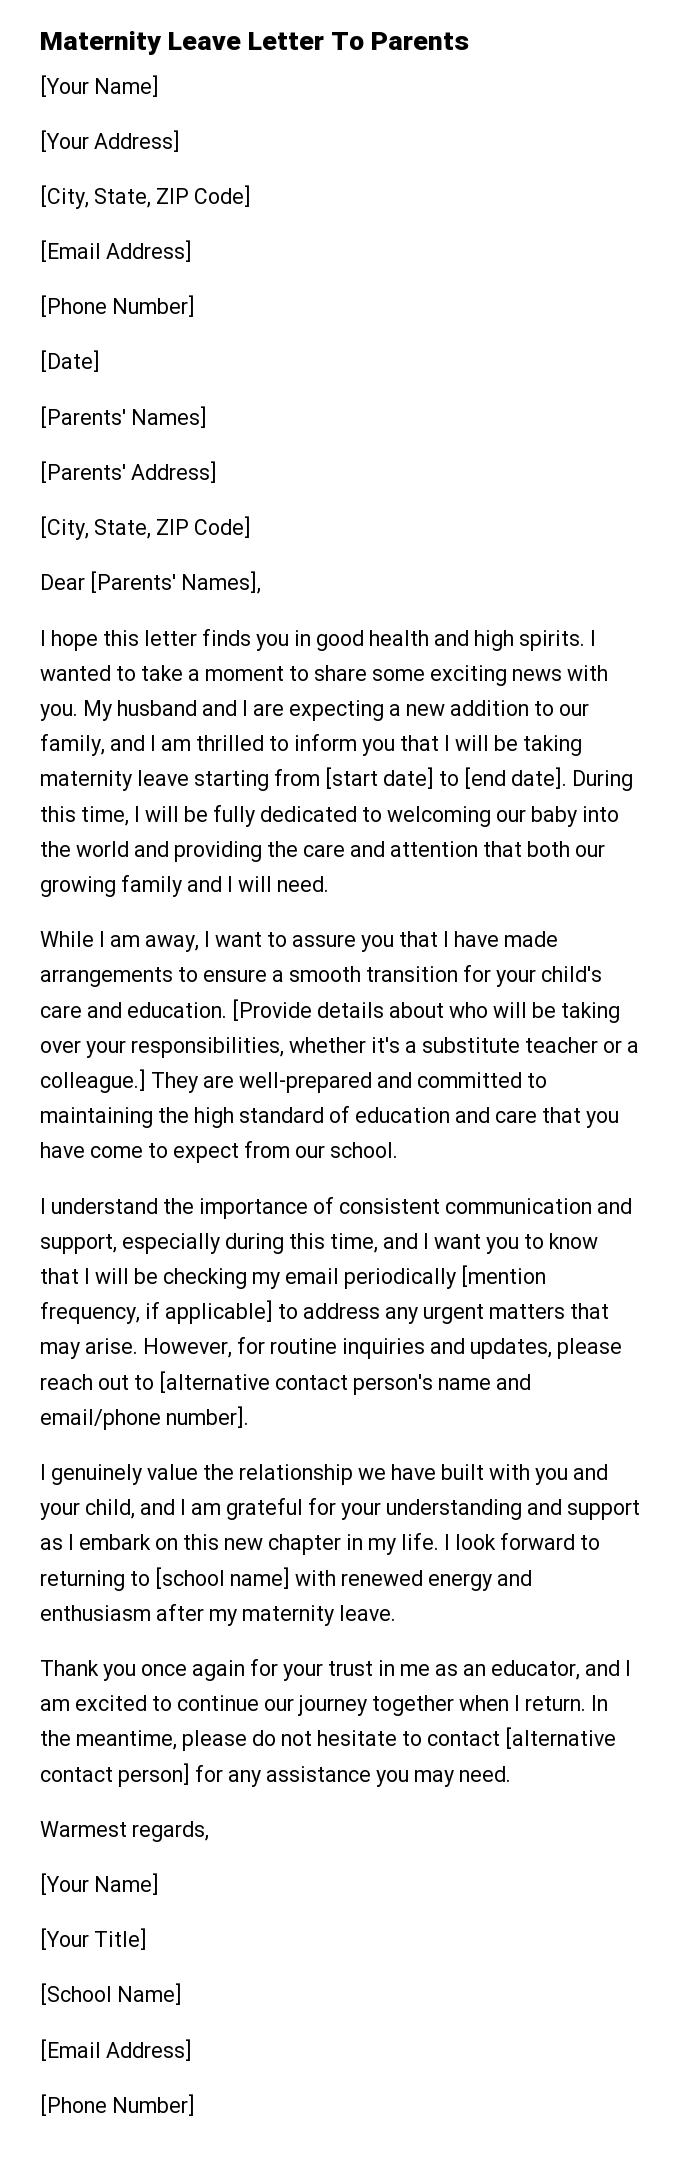 Maternity Leave Letter To Parents